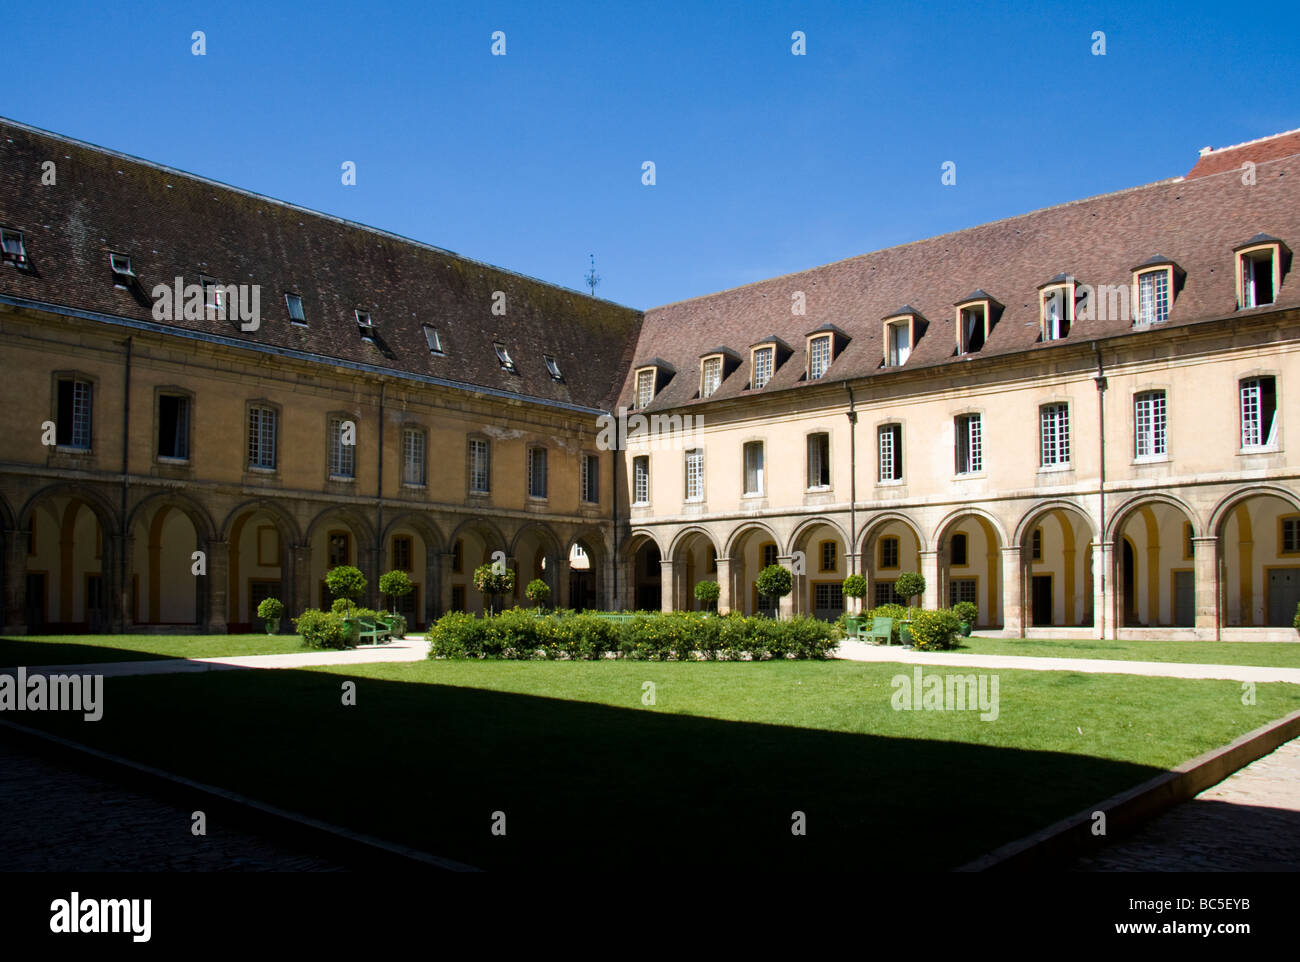 Abbaye de Cluny Cluny Bourgogne France Banque D'Images